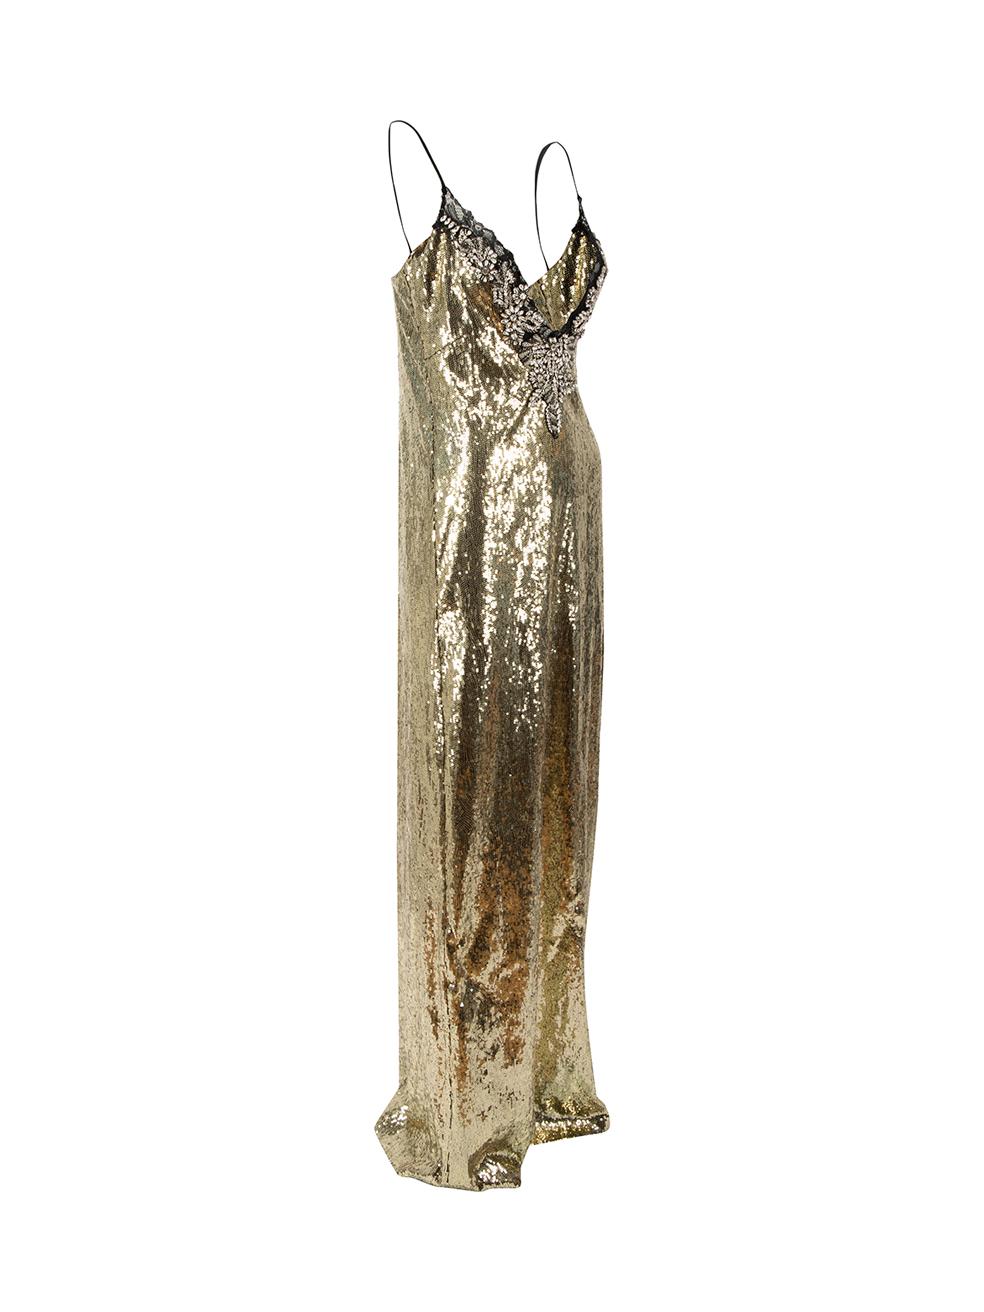 CONDITION is Never worn, with tags. No visible wear to dress is evident on this new Dundas designer resale item.



Details


Gold

Polyester

Dress

Sleeveless

Plunge neckline

Crystal embellished neckline

Side zip fastening

Side leg